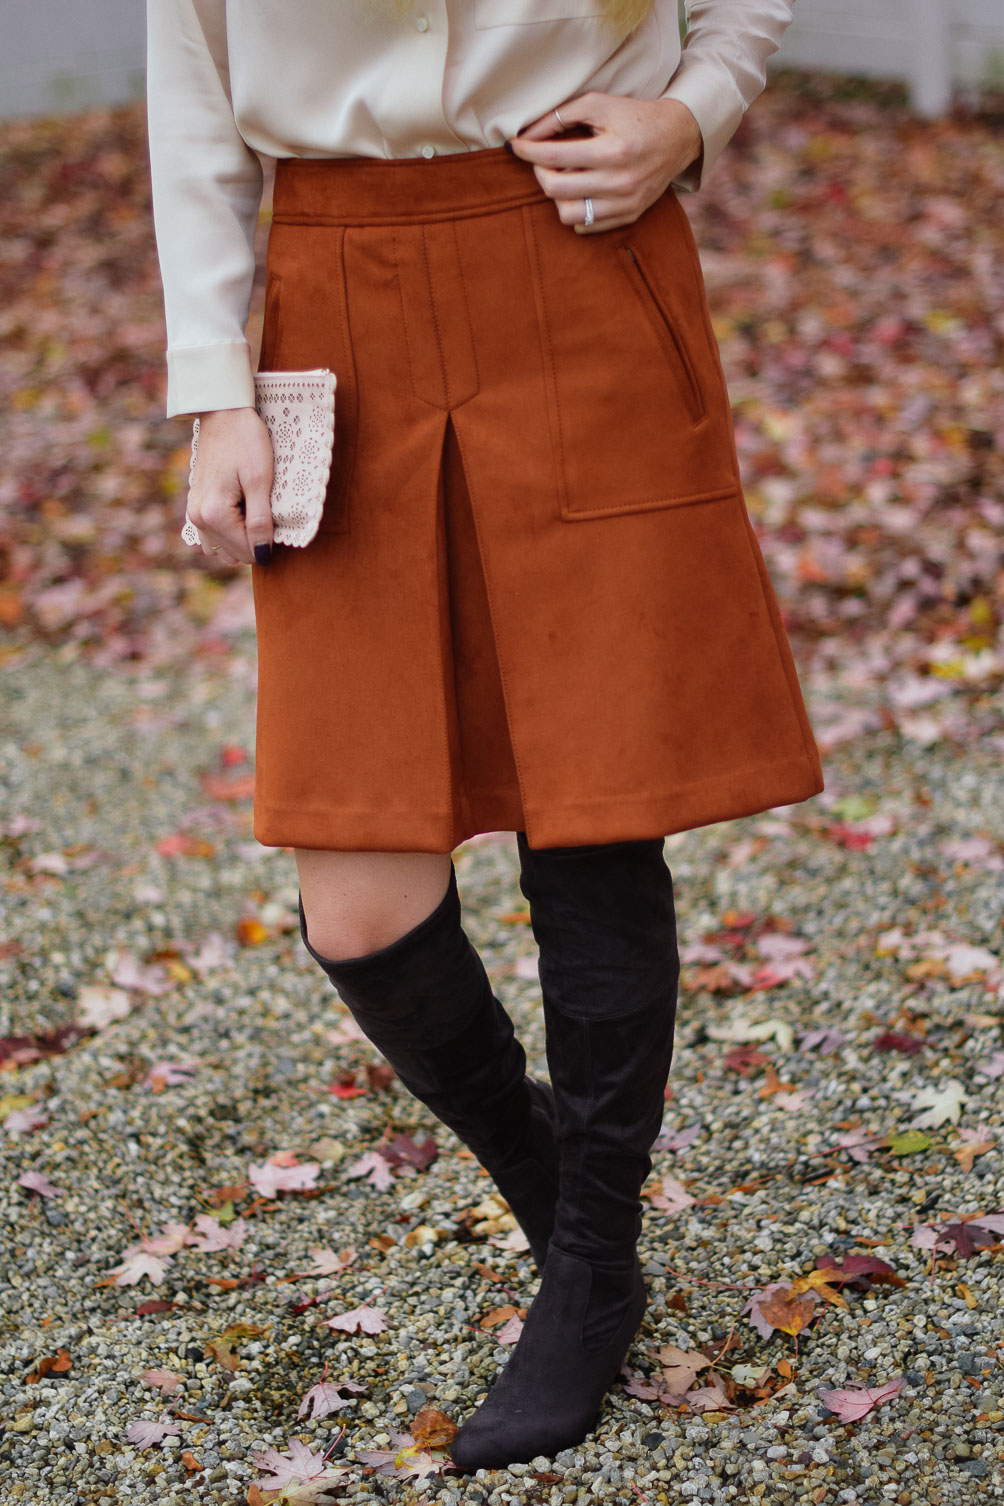 Leslie Musser wearing LOFT rust suede skirt with over the knee boots on one brass fox